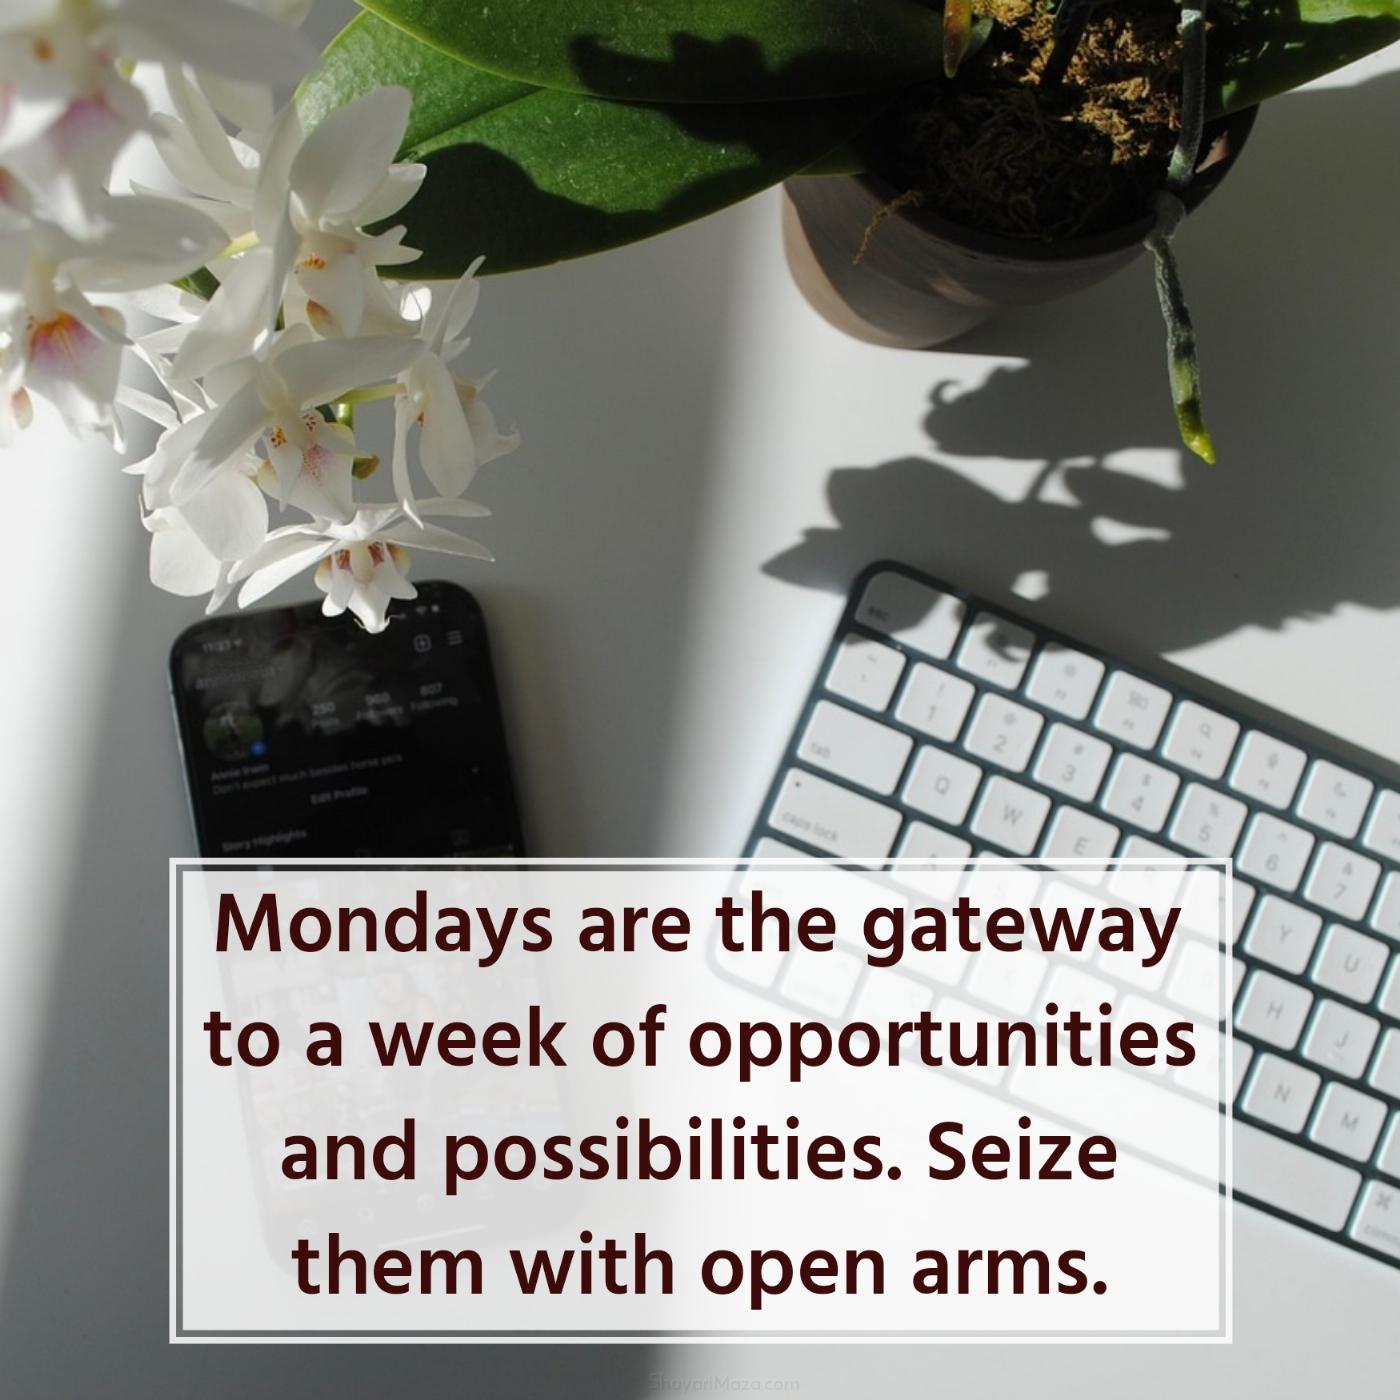 Mondays are the gateway to a week of opportunities